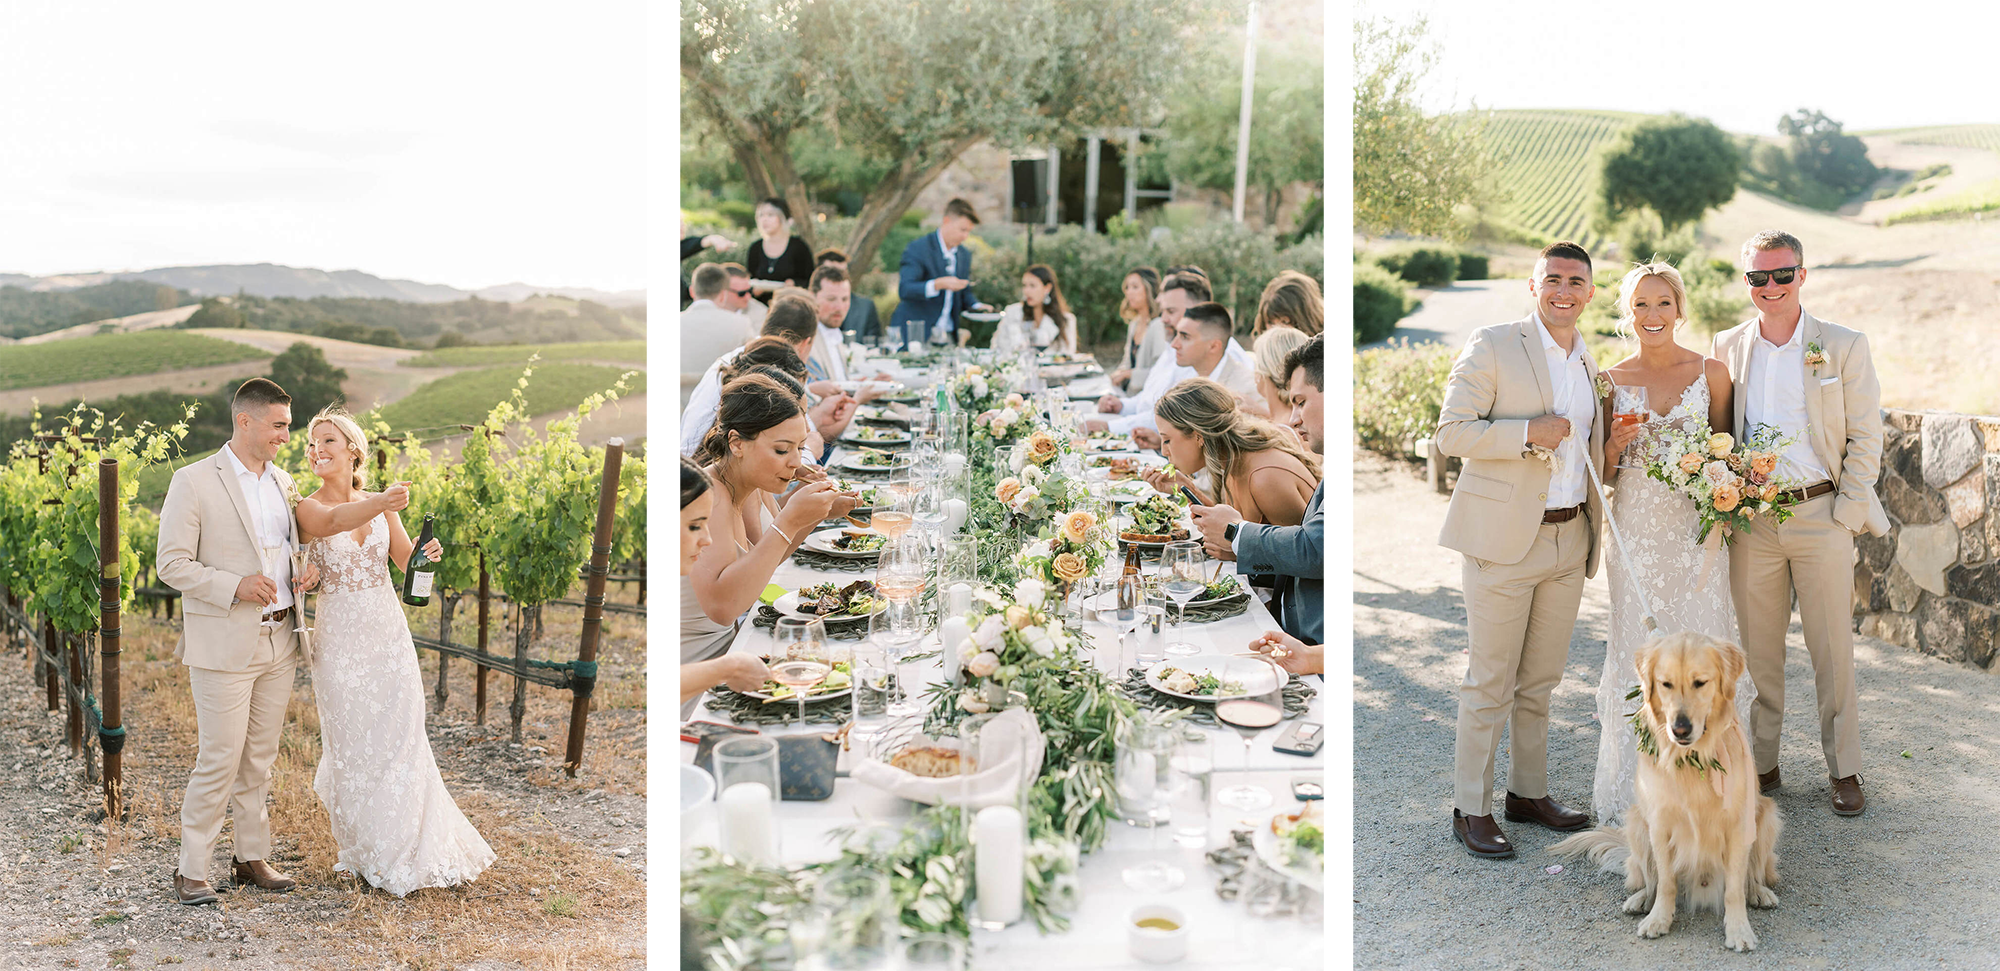 From Left to right: A couple cheers' on top of the vineyard; a view of a tablescape at a wedding; a Bride, Groom, Friend and a Golden retriever